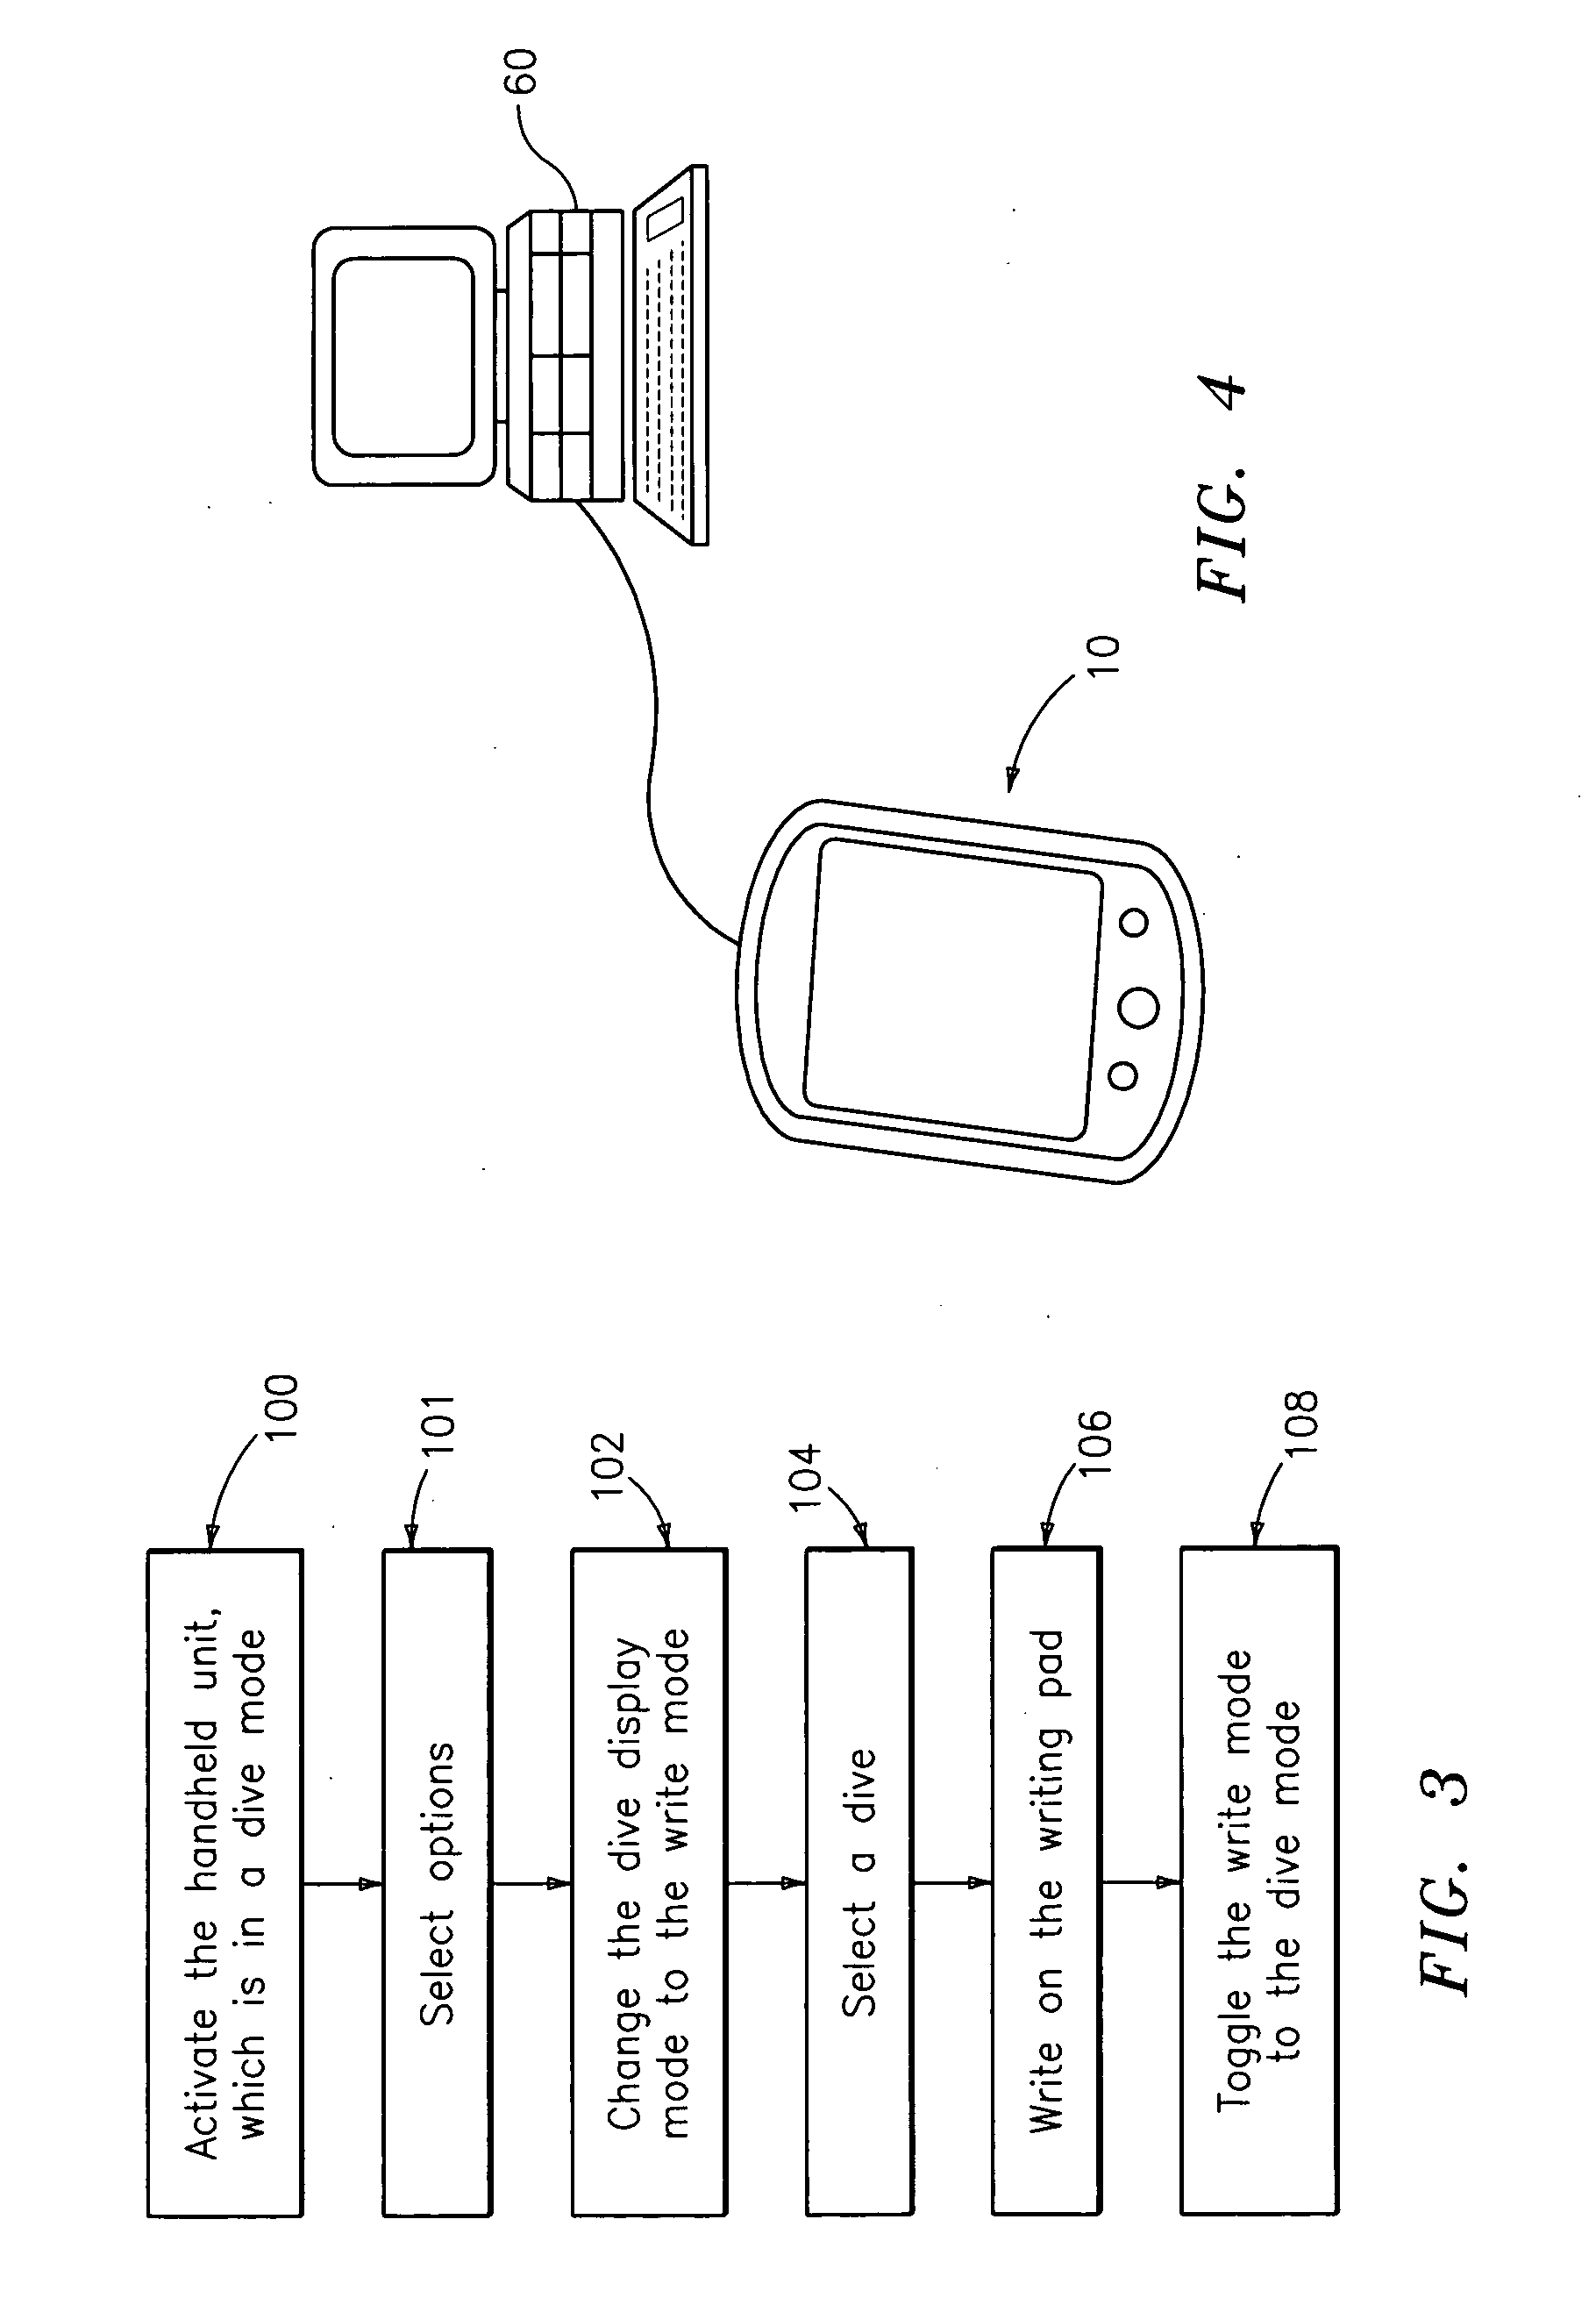 Apparatus and method for capturing site data while scuba diving